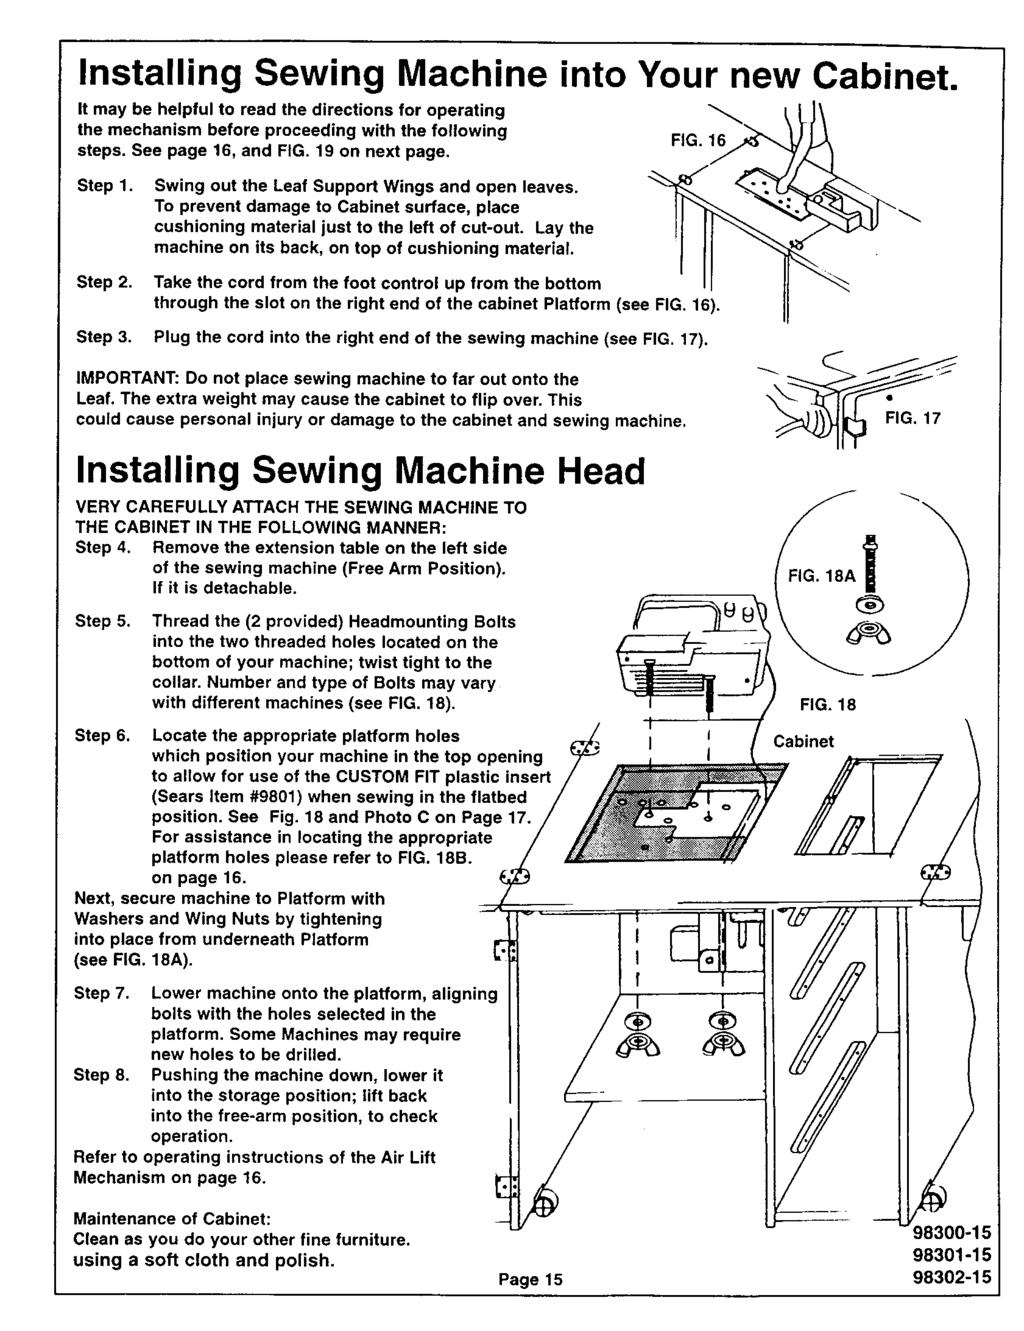 nstalling Sewing Machine into Your new Cabinet. t may be helpful to read the directions for operating the mechanism before proceeding with the following FG. 16 steps. See page 16, and FG.